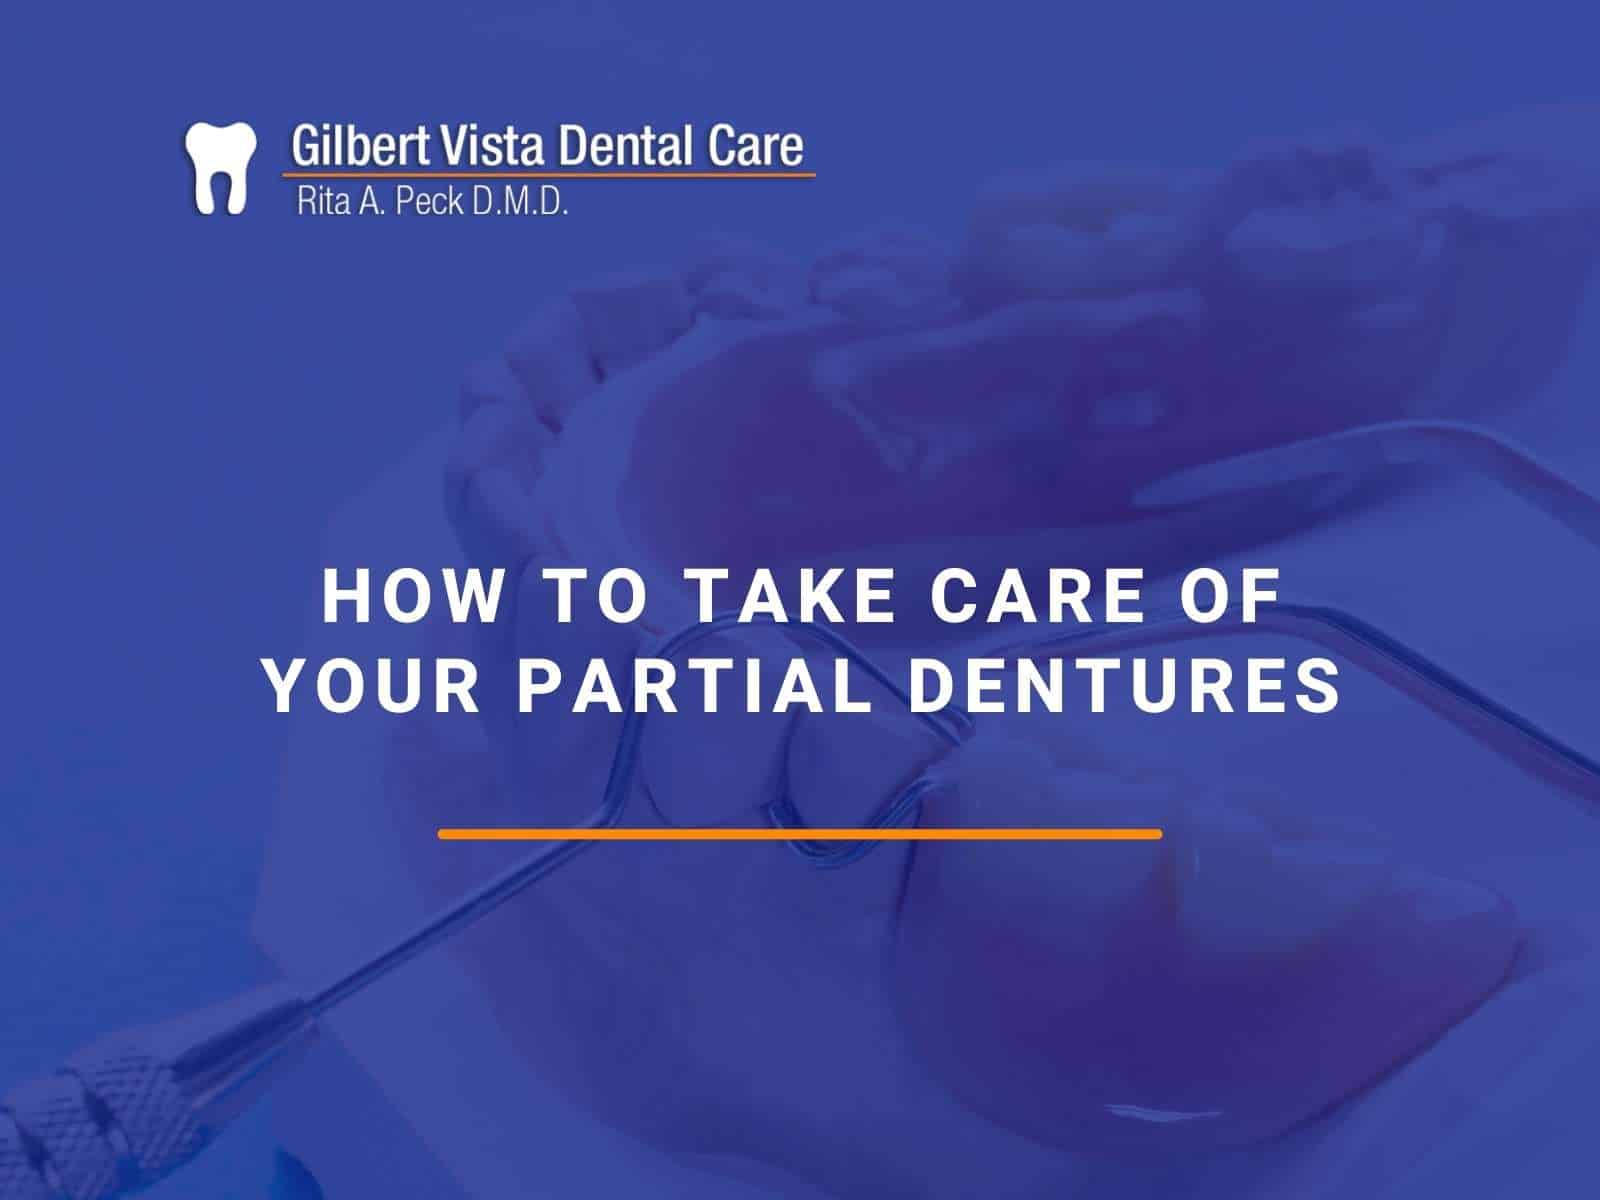 How To Take Care Of Your Partial Dentures